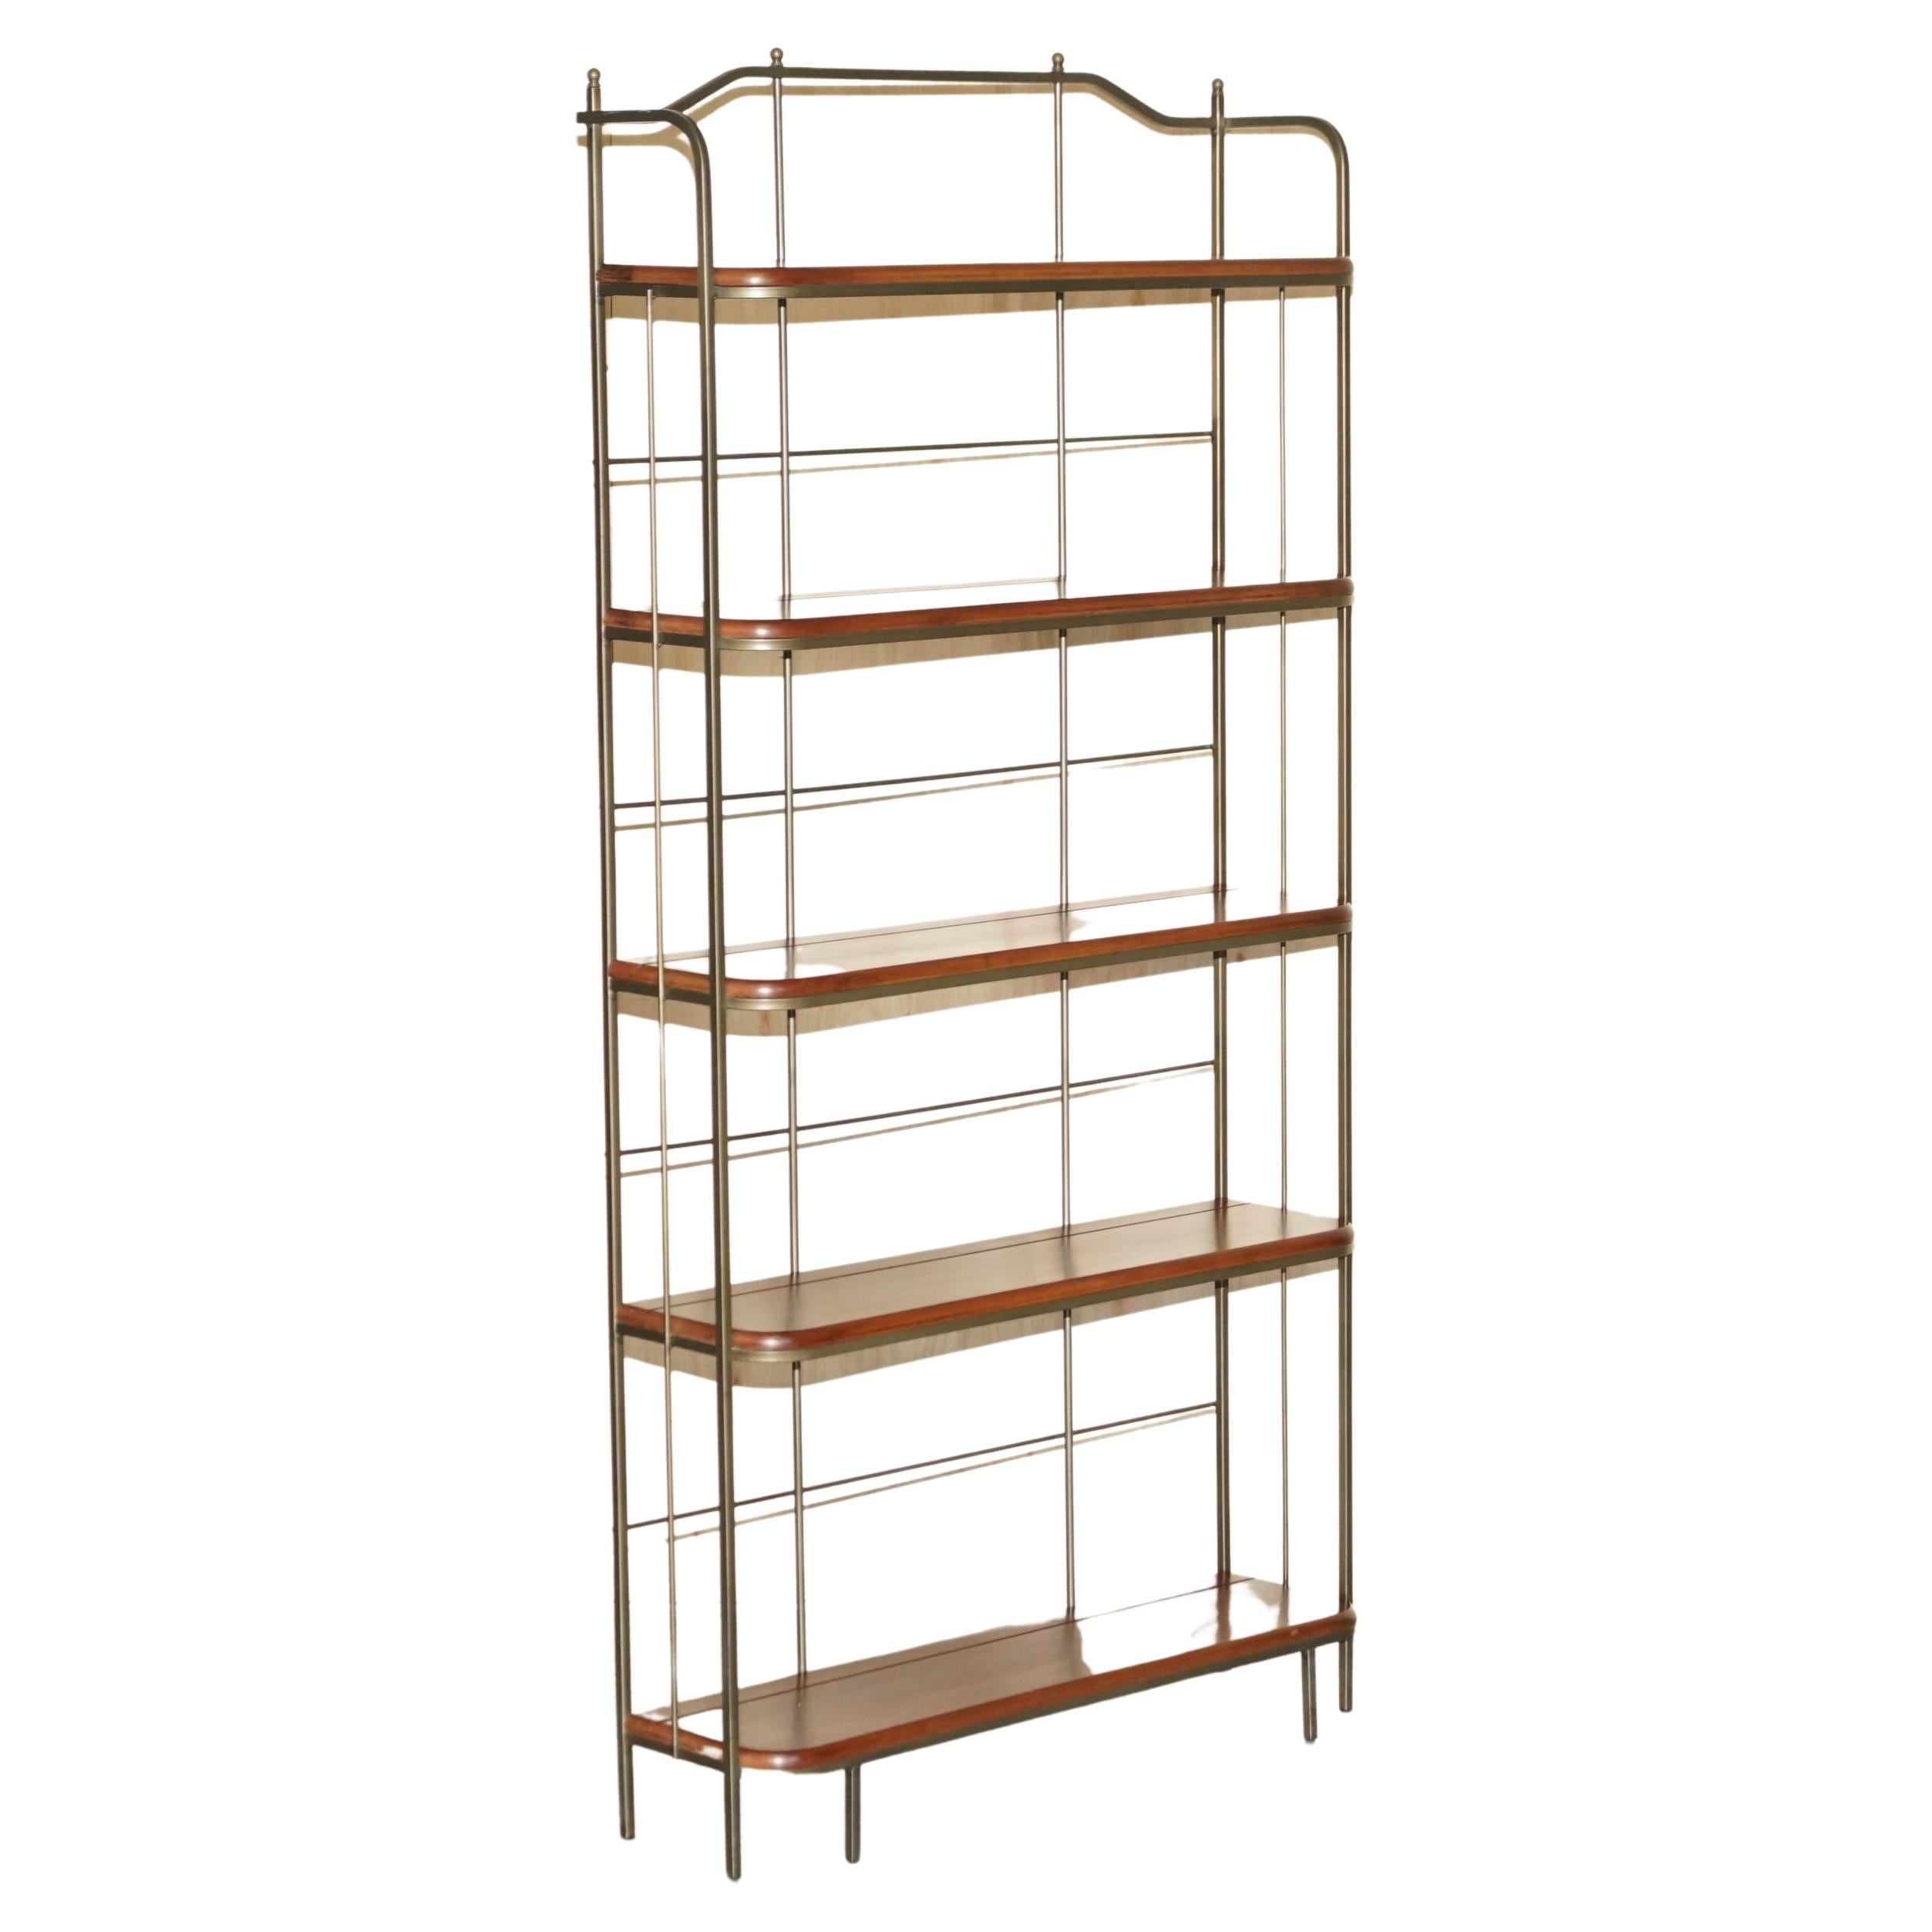 Stunning Maple & Wrought Iron Charleston Forge Etagere Open Library Bookcase For Sale